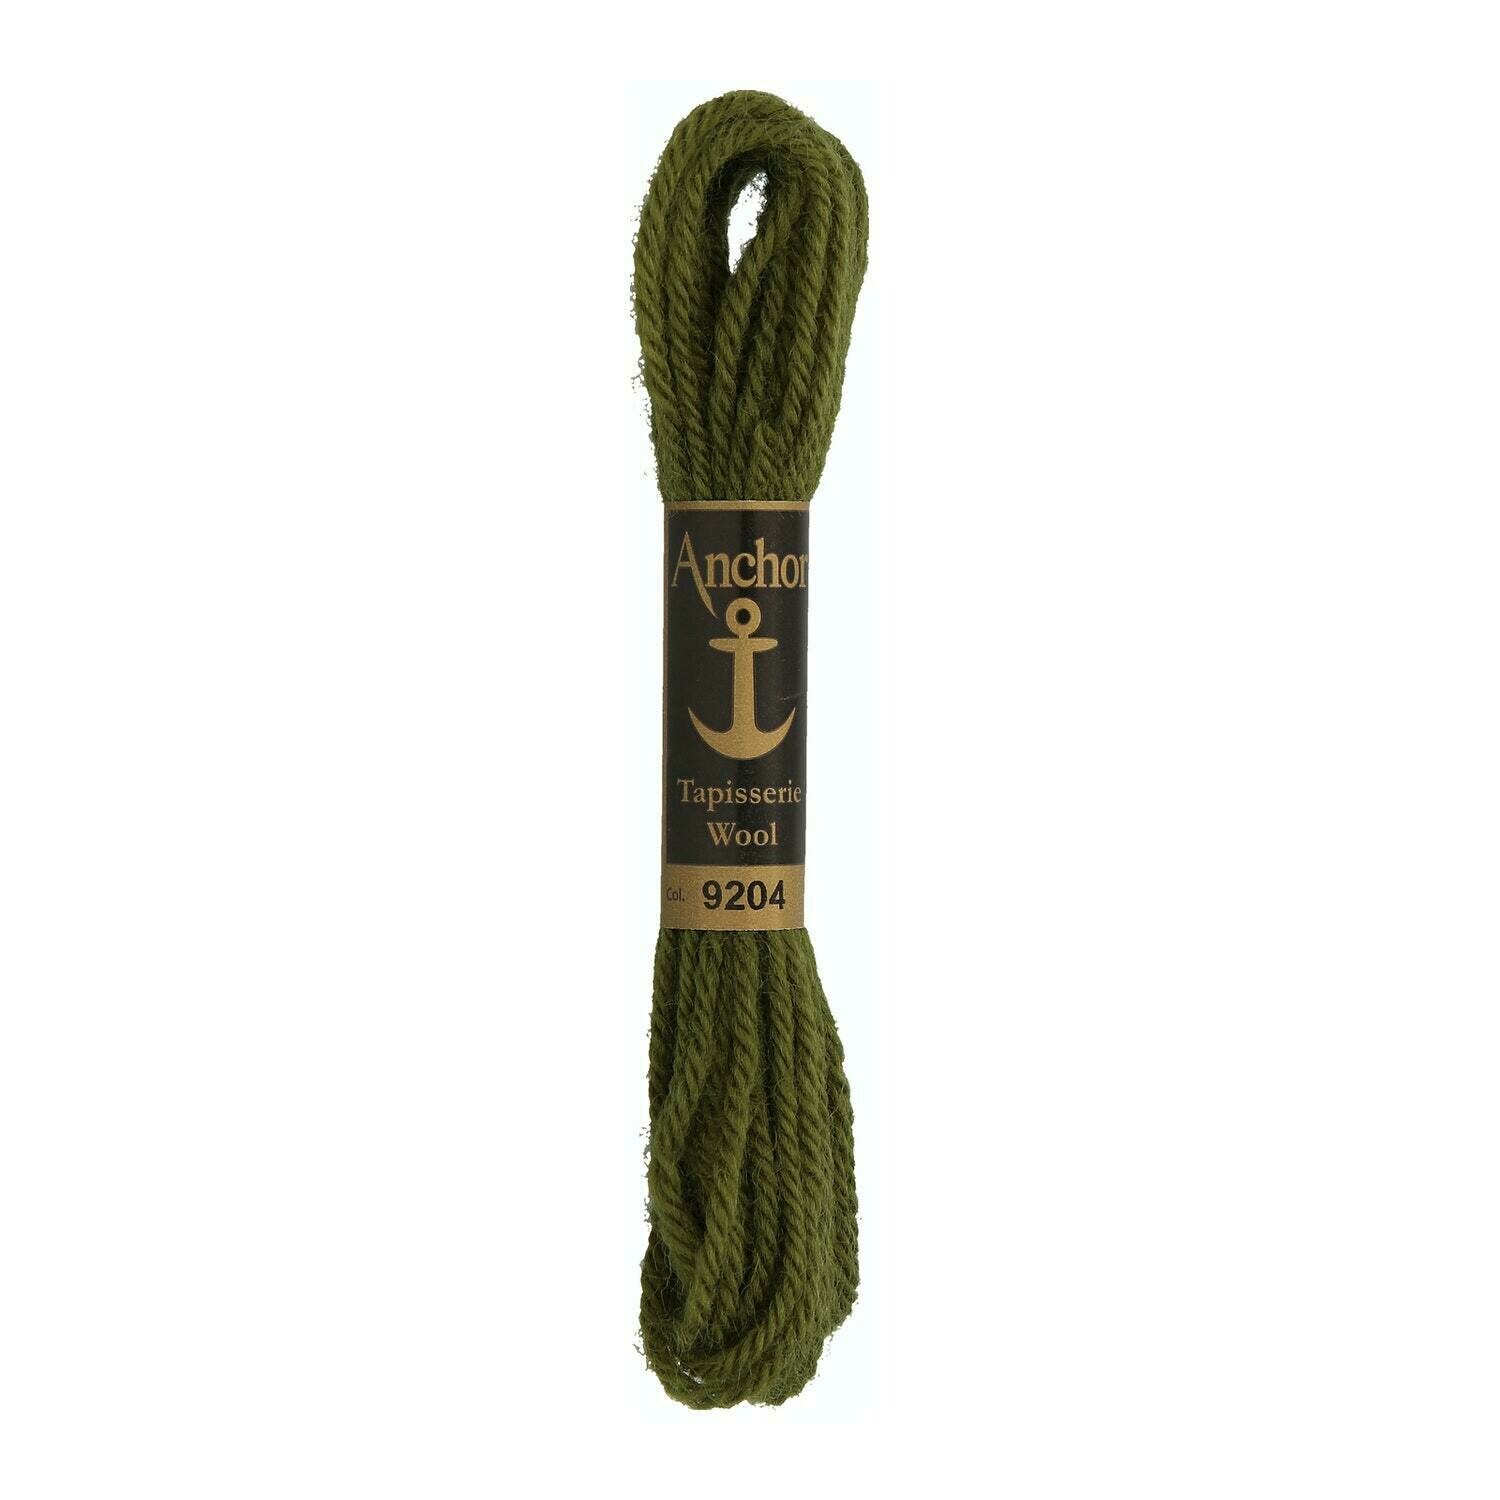 Anchor Tapisserie Wool #09204